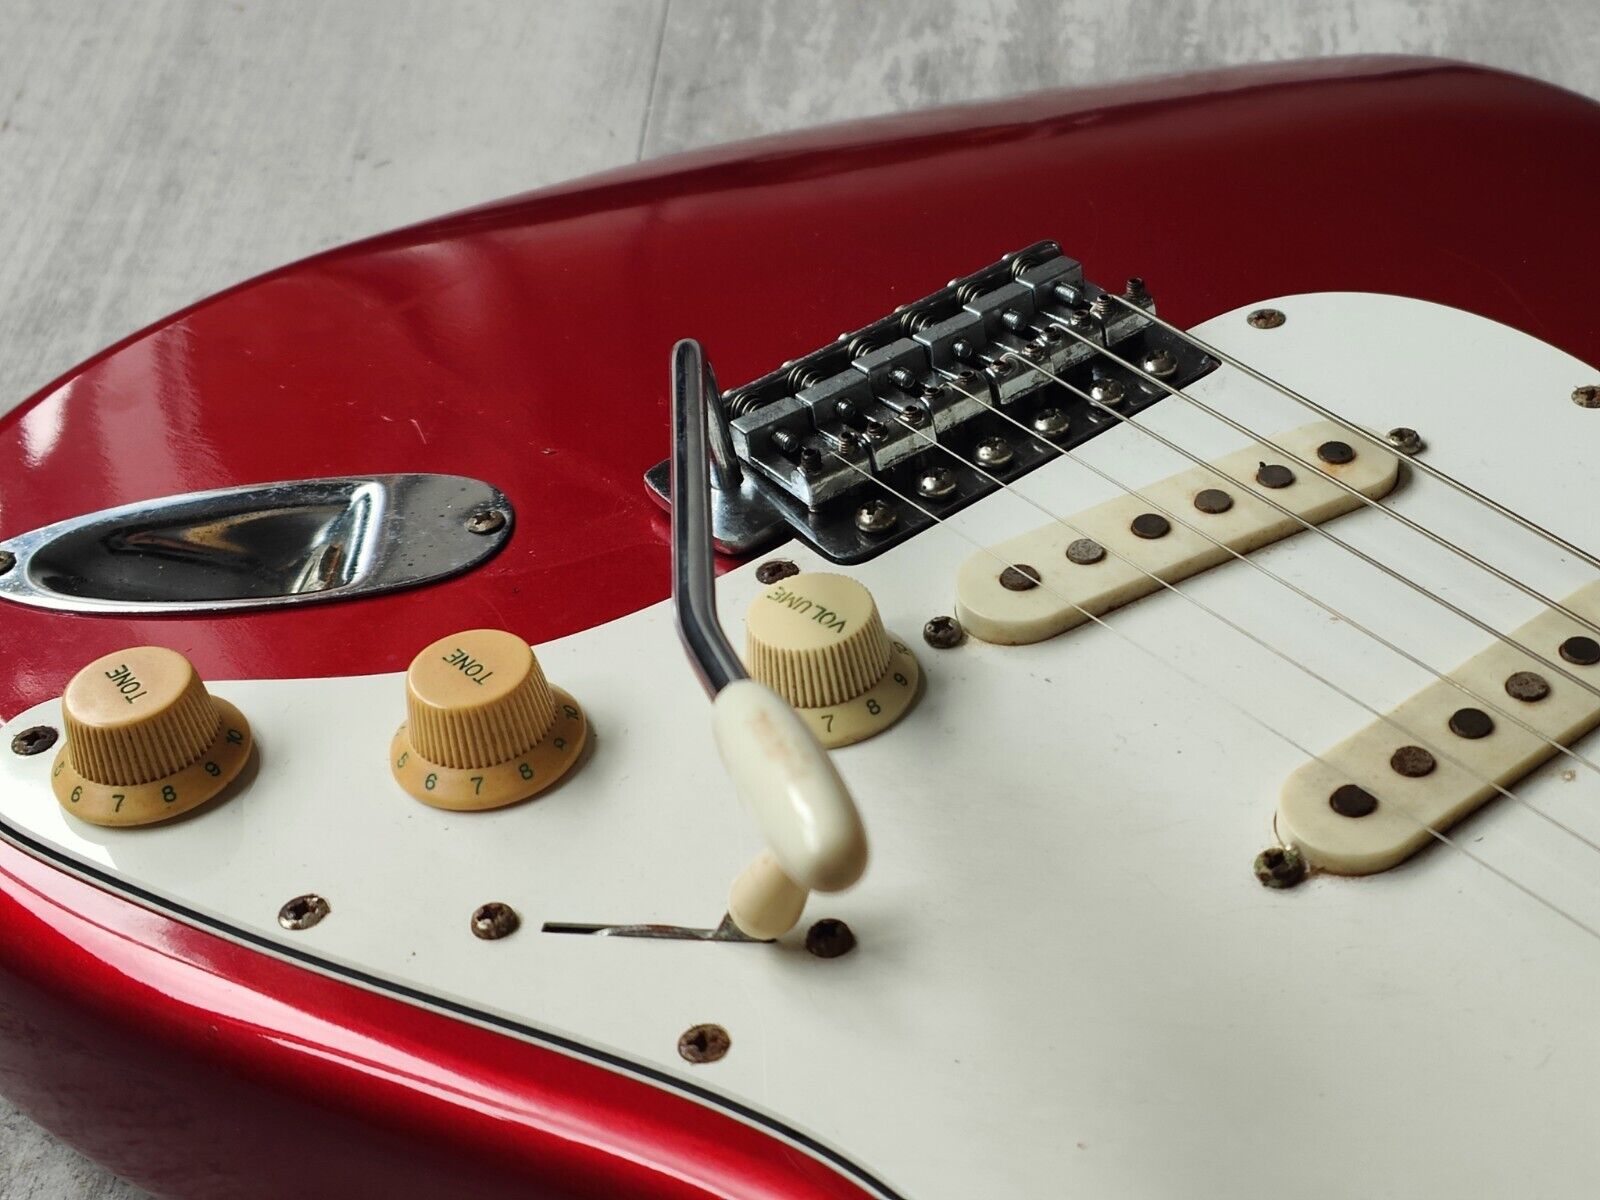 1983 Tokai Japan SS-40 Silver Star Stratocaster (Candy Apple Red)